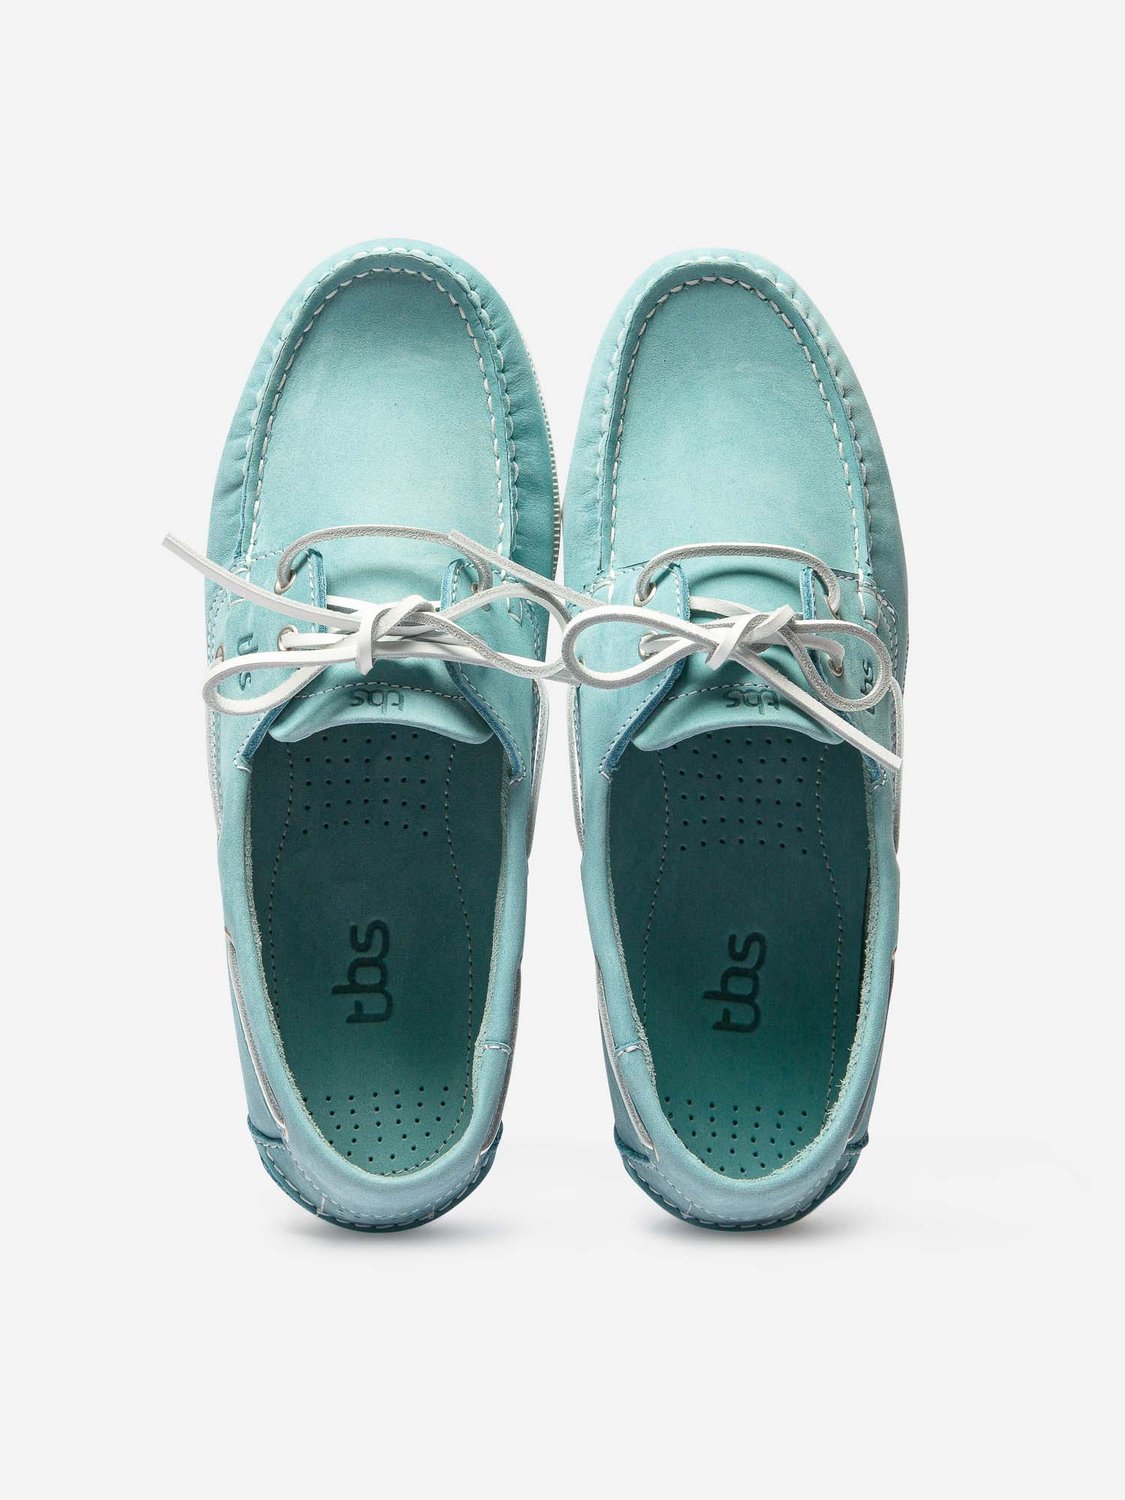 Chaussures Bateau Homme Cuir Nubuck Turquoise